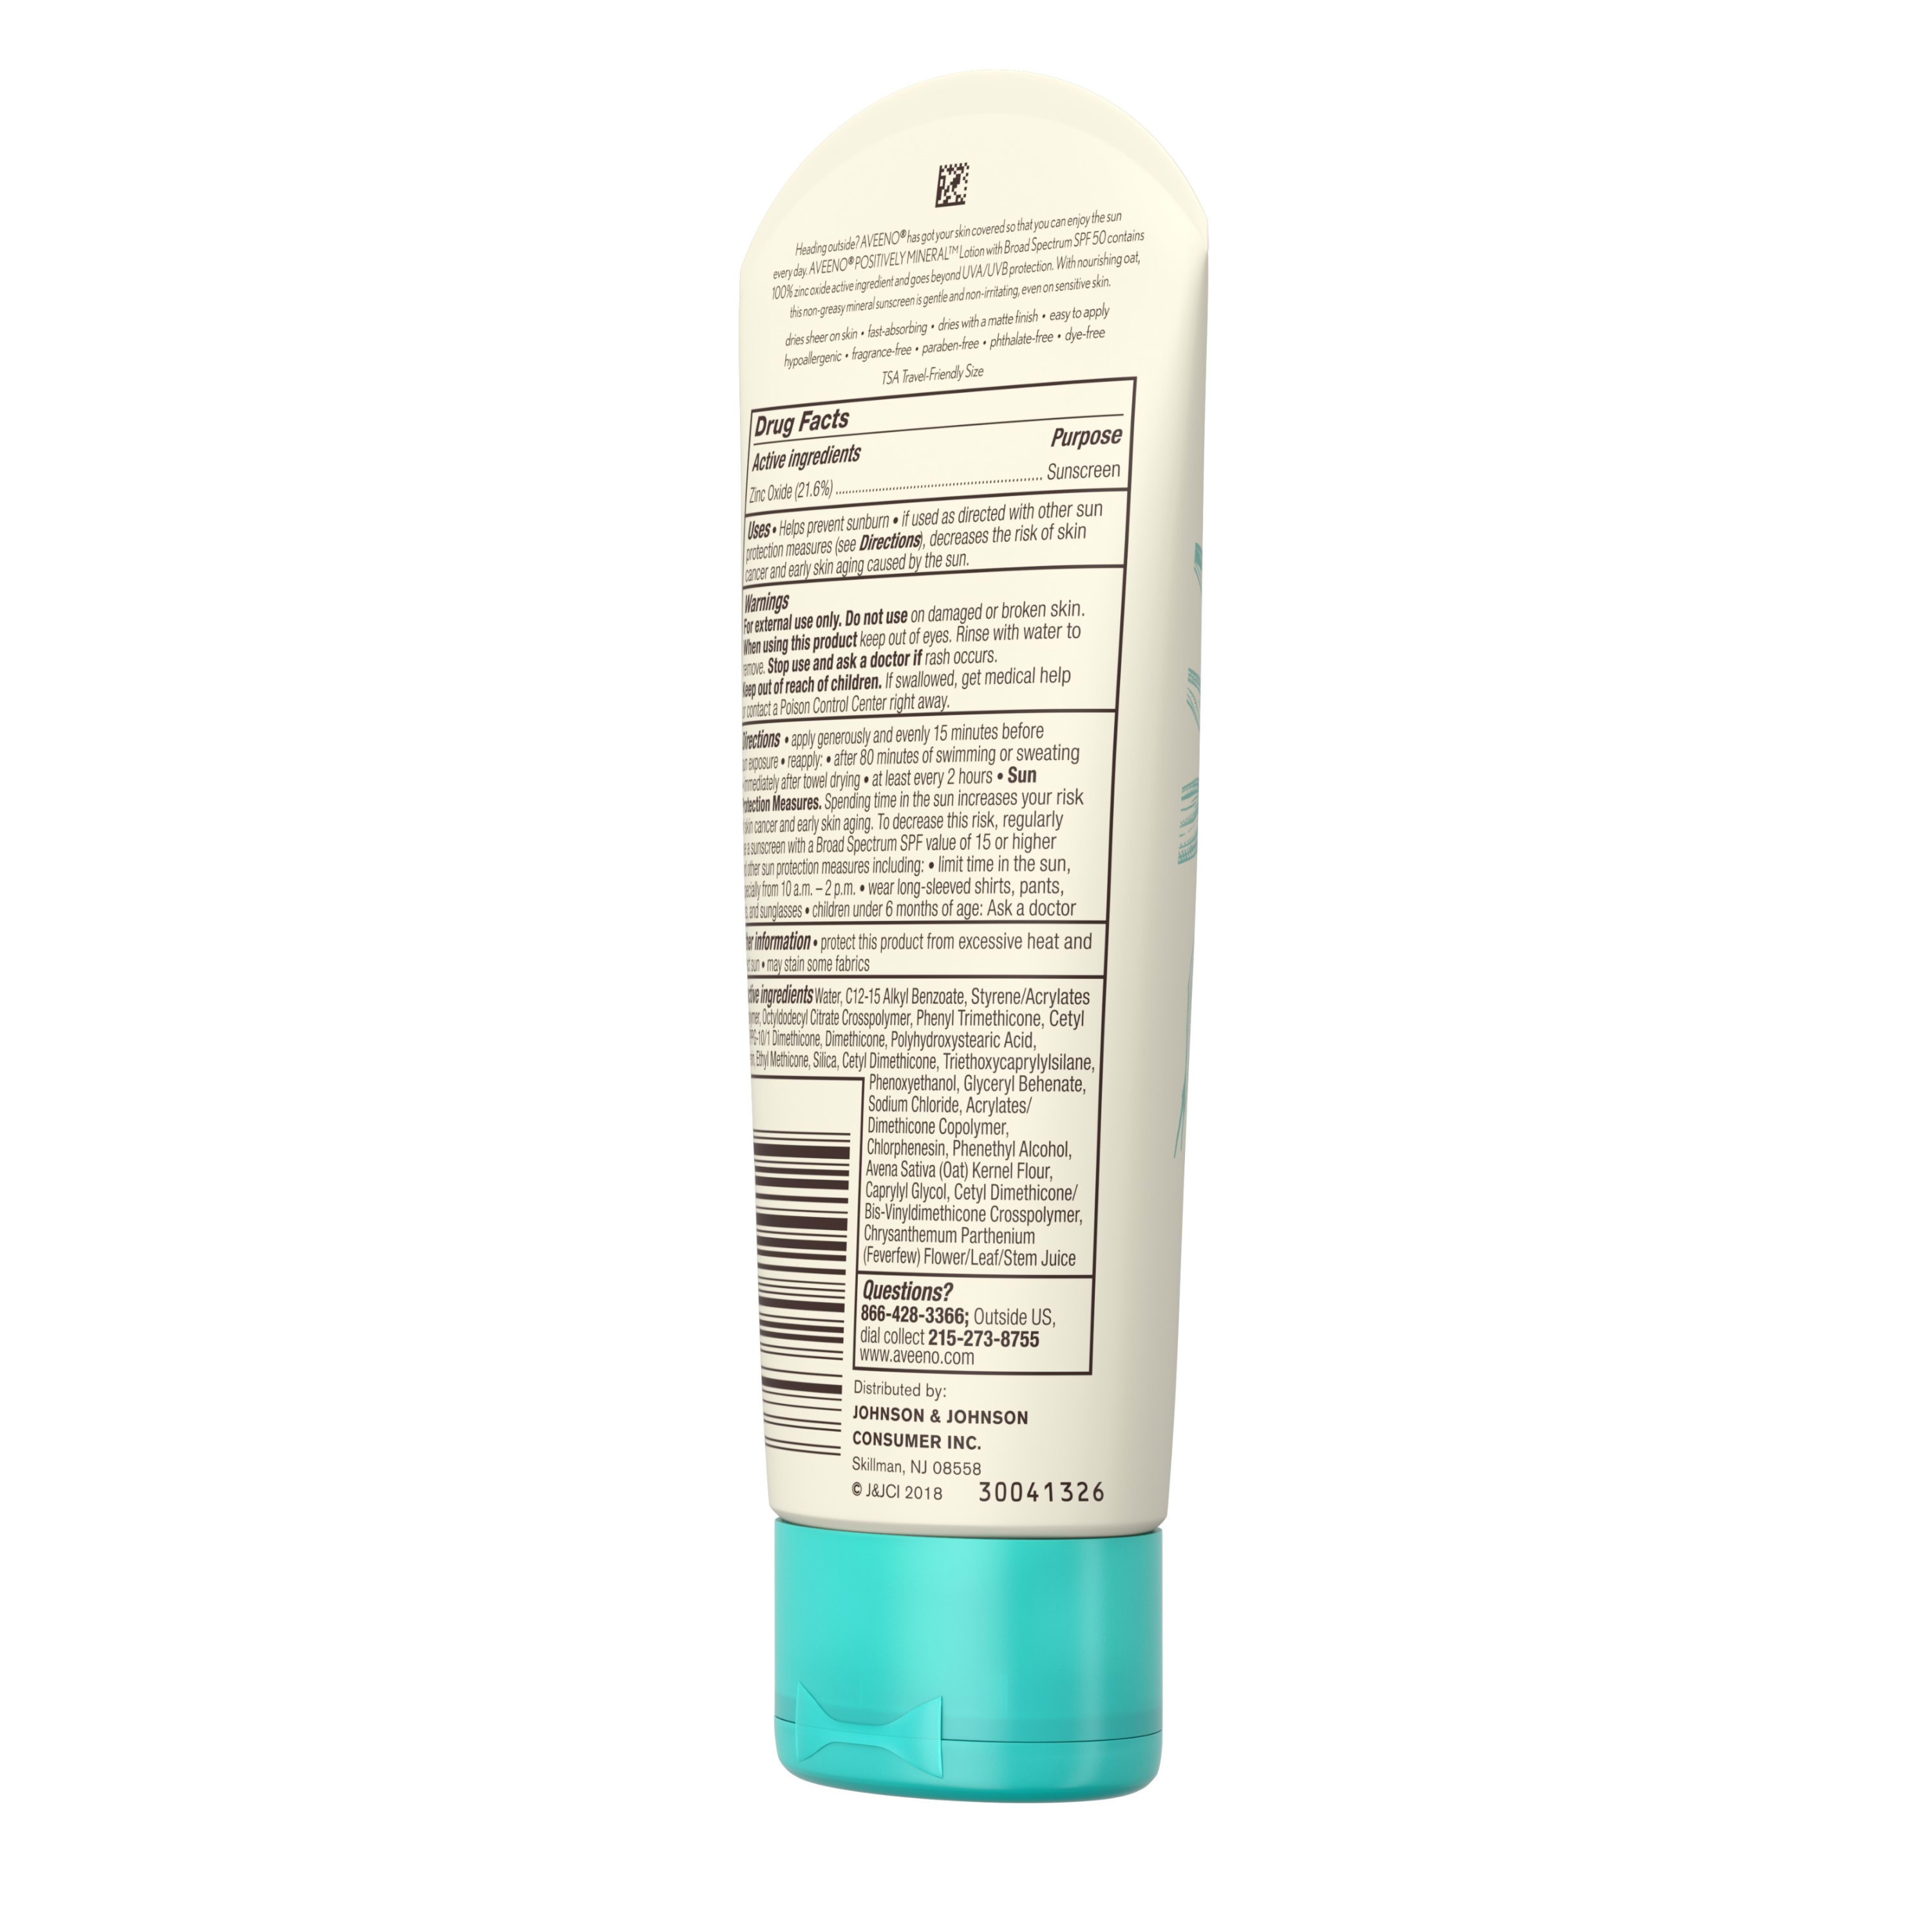 Aveeno Positively Mineral Sensitive Sunscreen Lotion SPF 50, 3 fl. oz - image 16 of 16